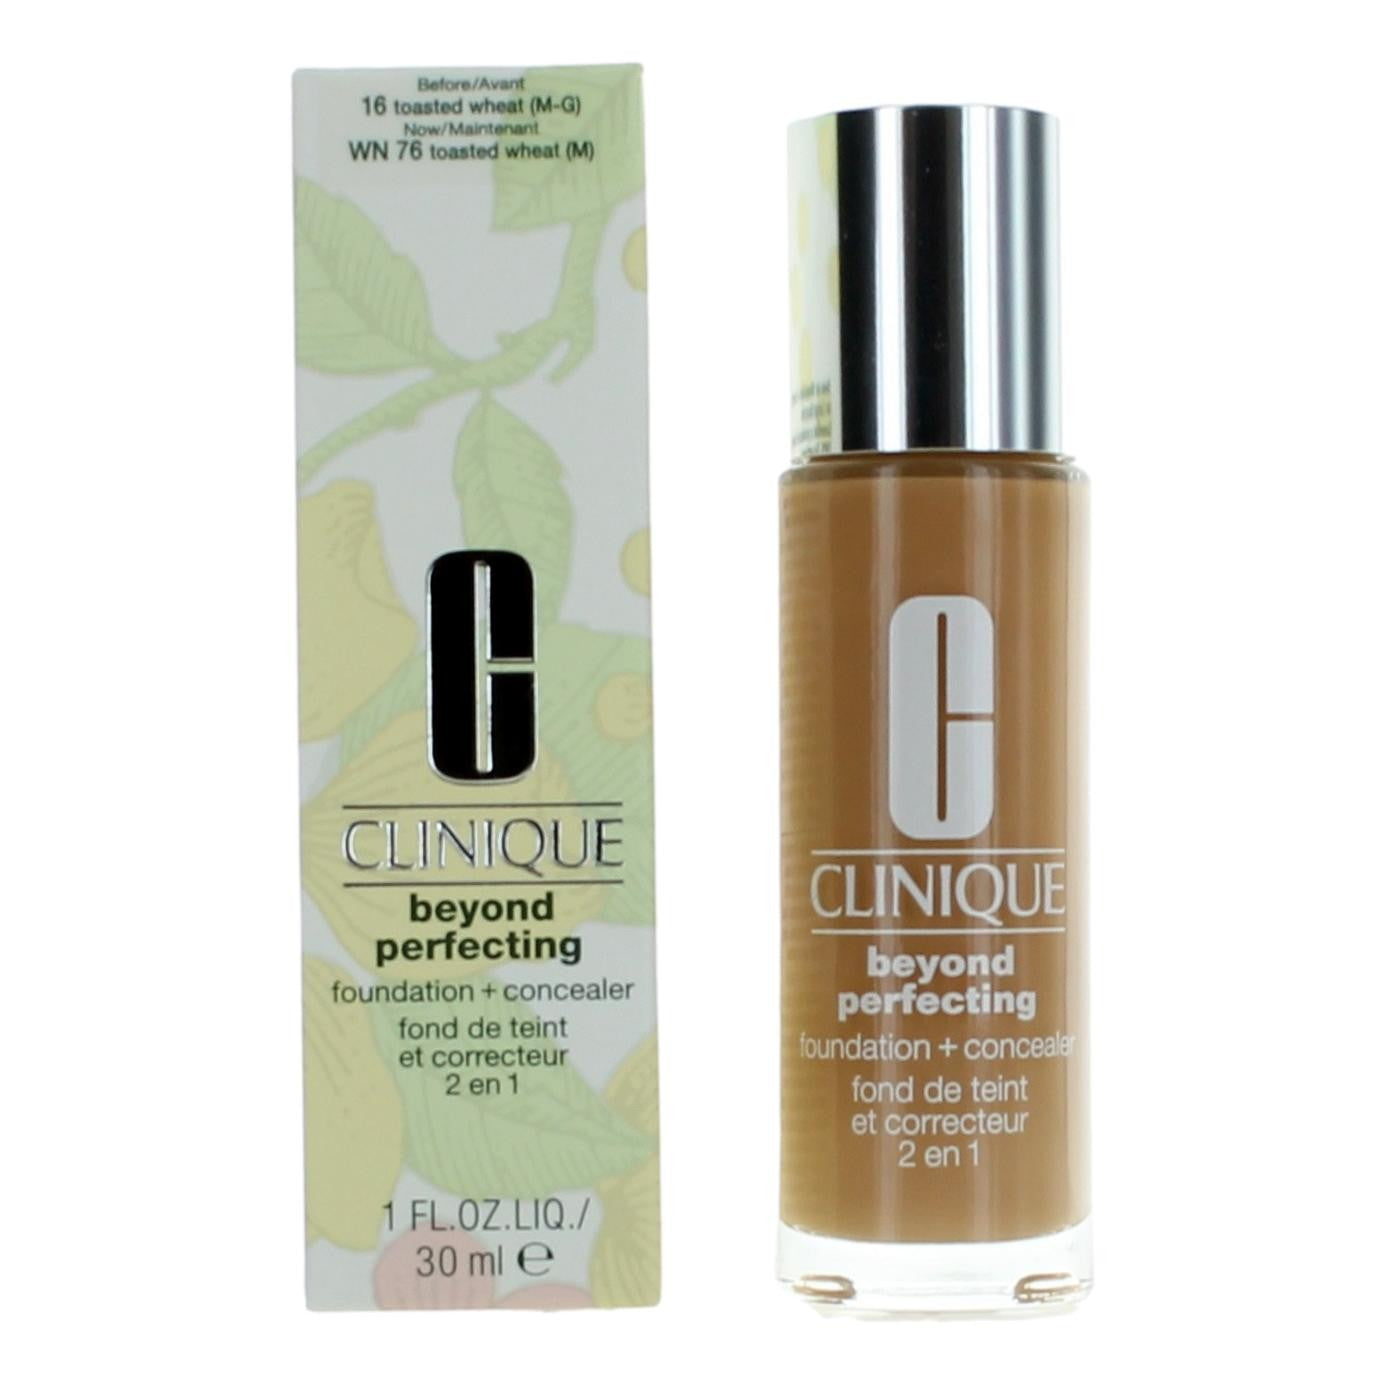 Clinique Beyond Perfecting, 1oz Foundation + Concealer - WN 76 Toasted Wheat - WN 76 Toasted Wheat